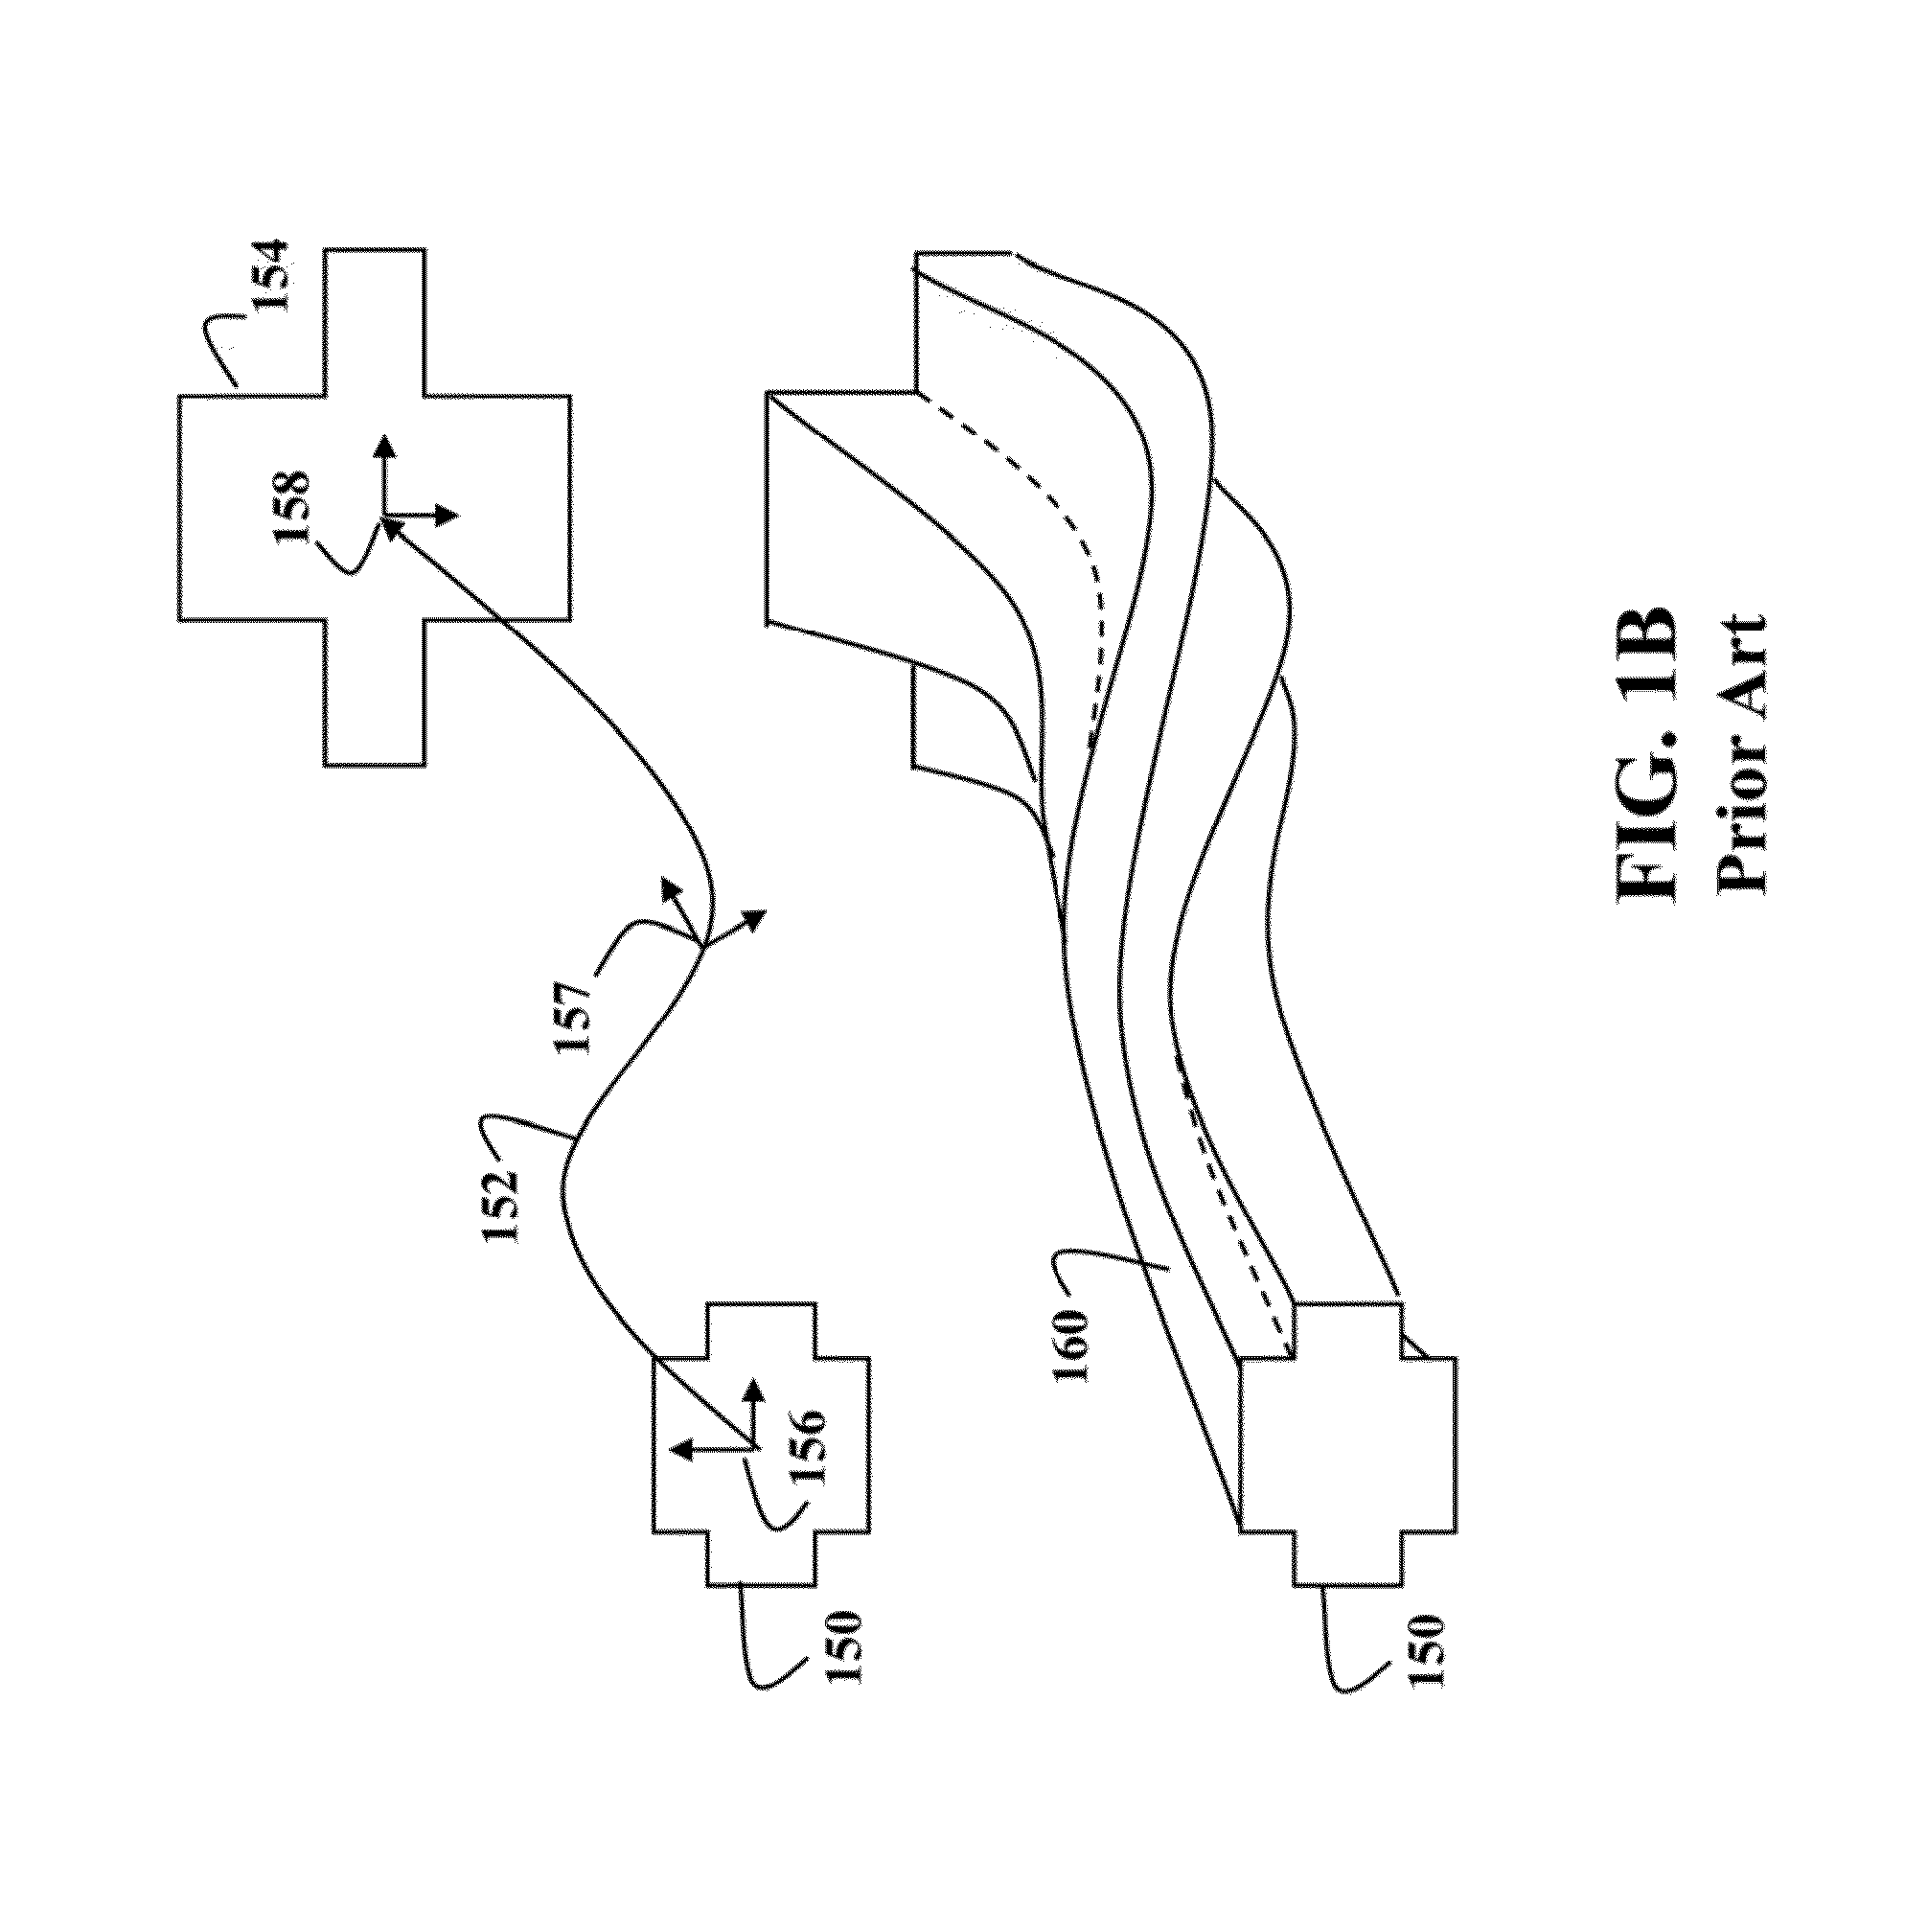 System and method for simulating machining objects